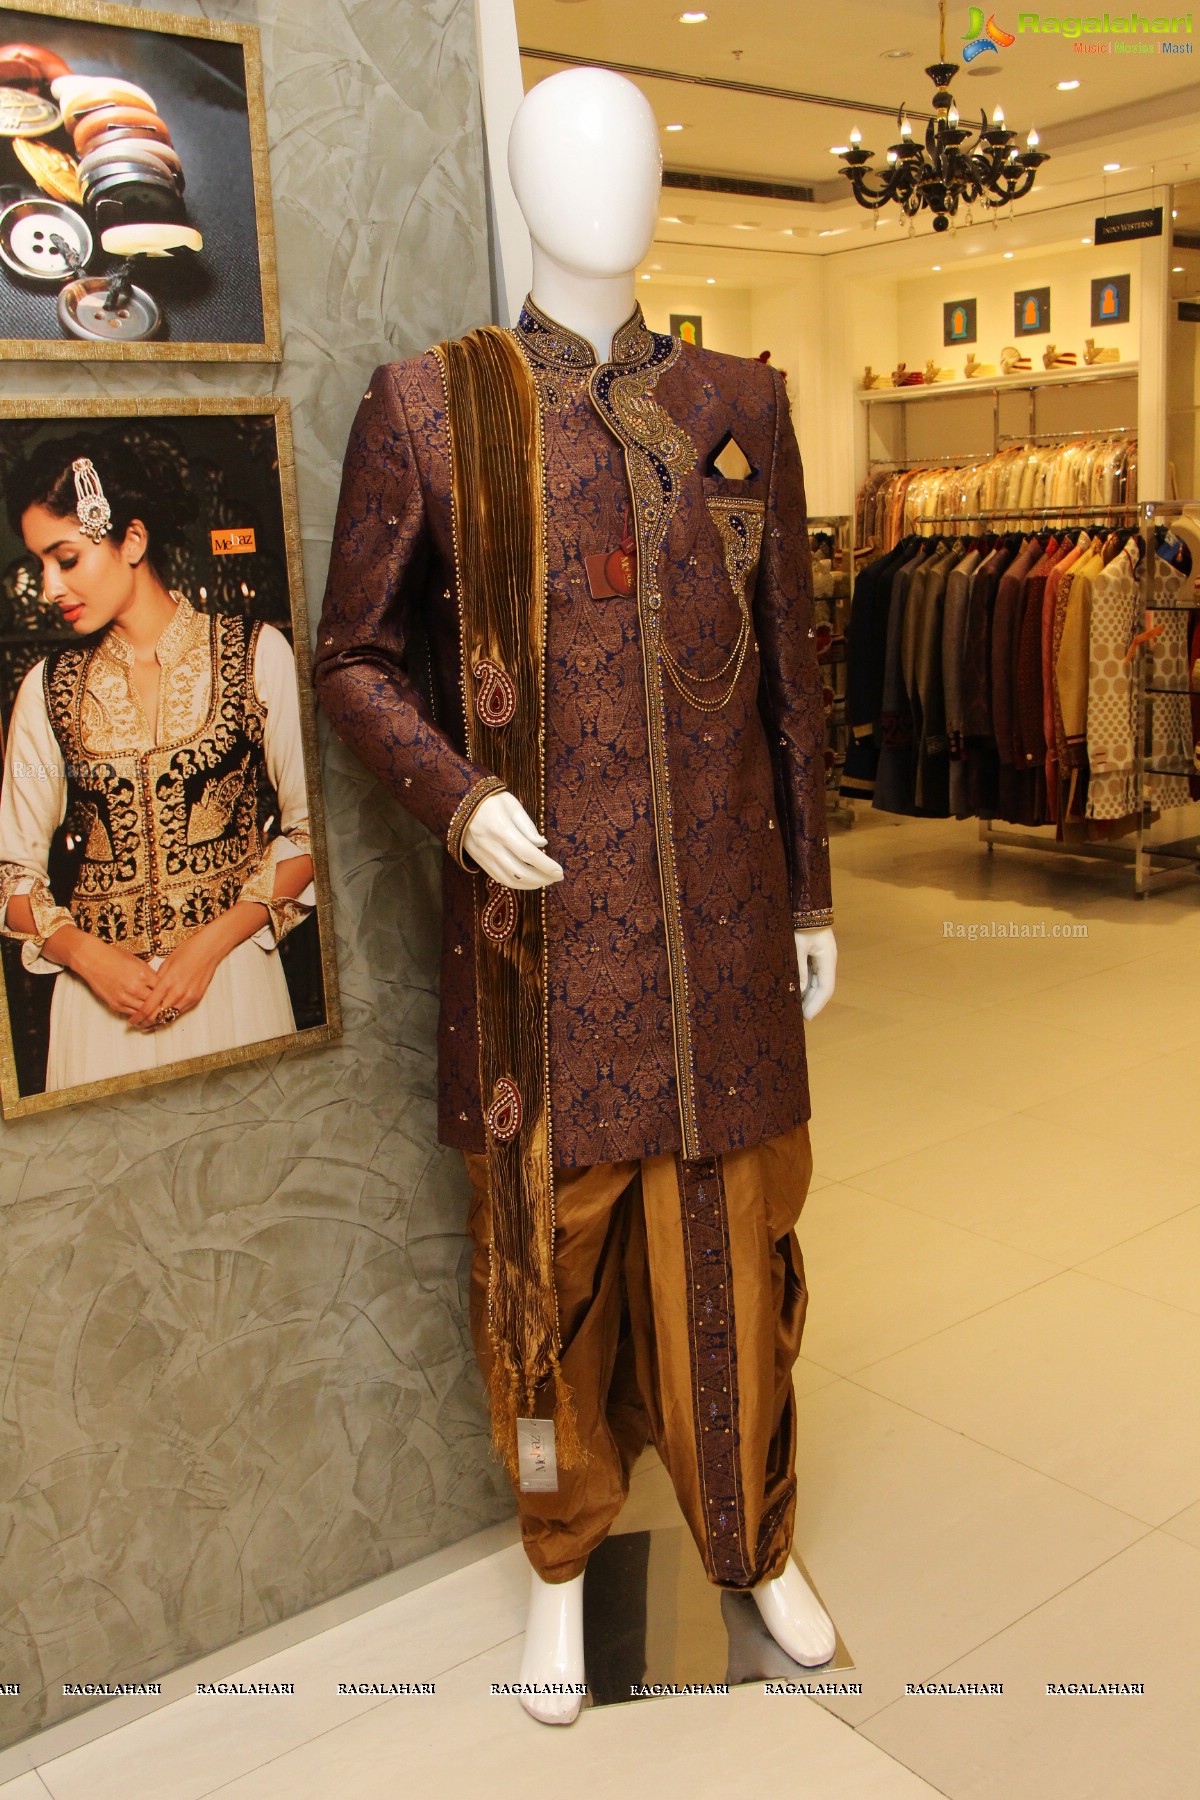 Exclusive Wedding Collection Launch by Rohit Khandelwal at Mebaz, Forum Sujana Mall, Hyderabad